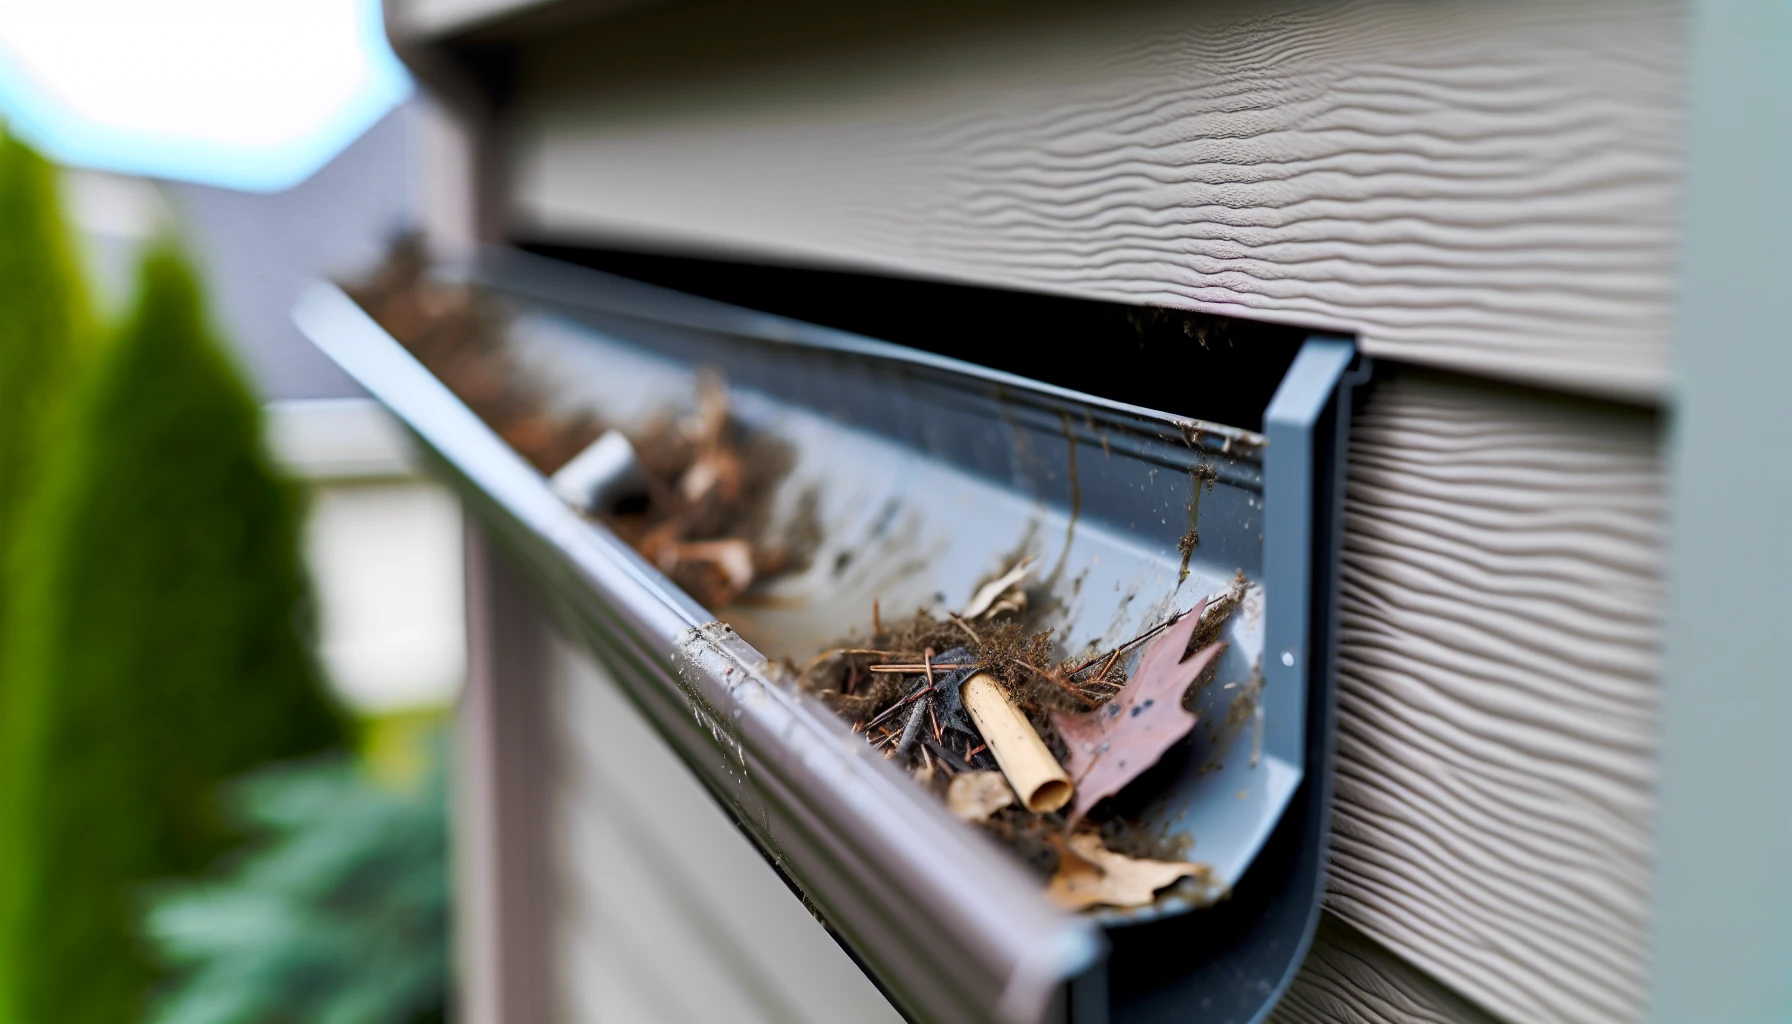 A close-up image of rain gutters with visible debris and clogs